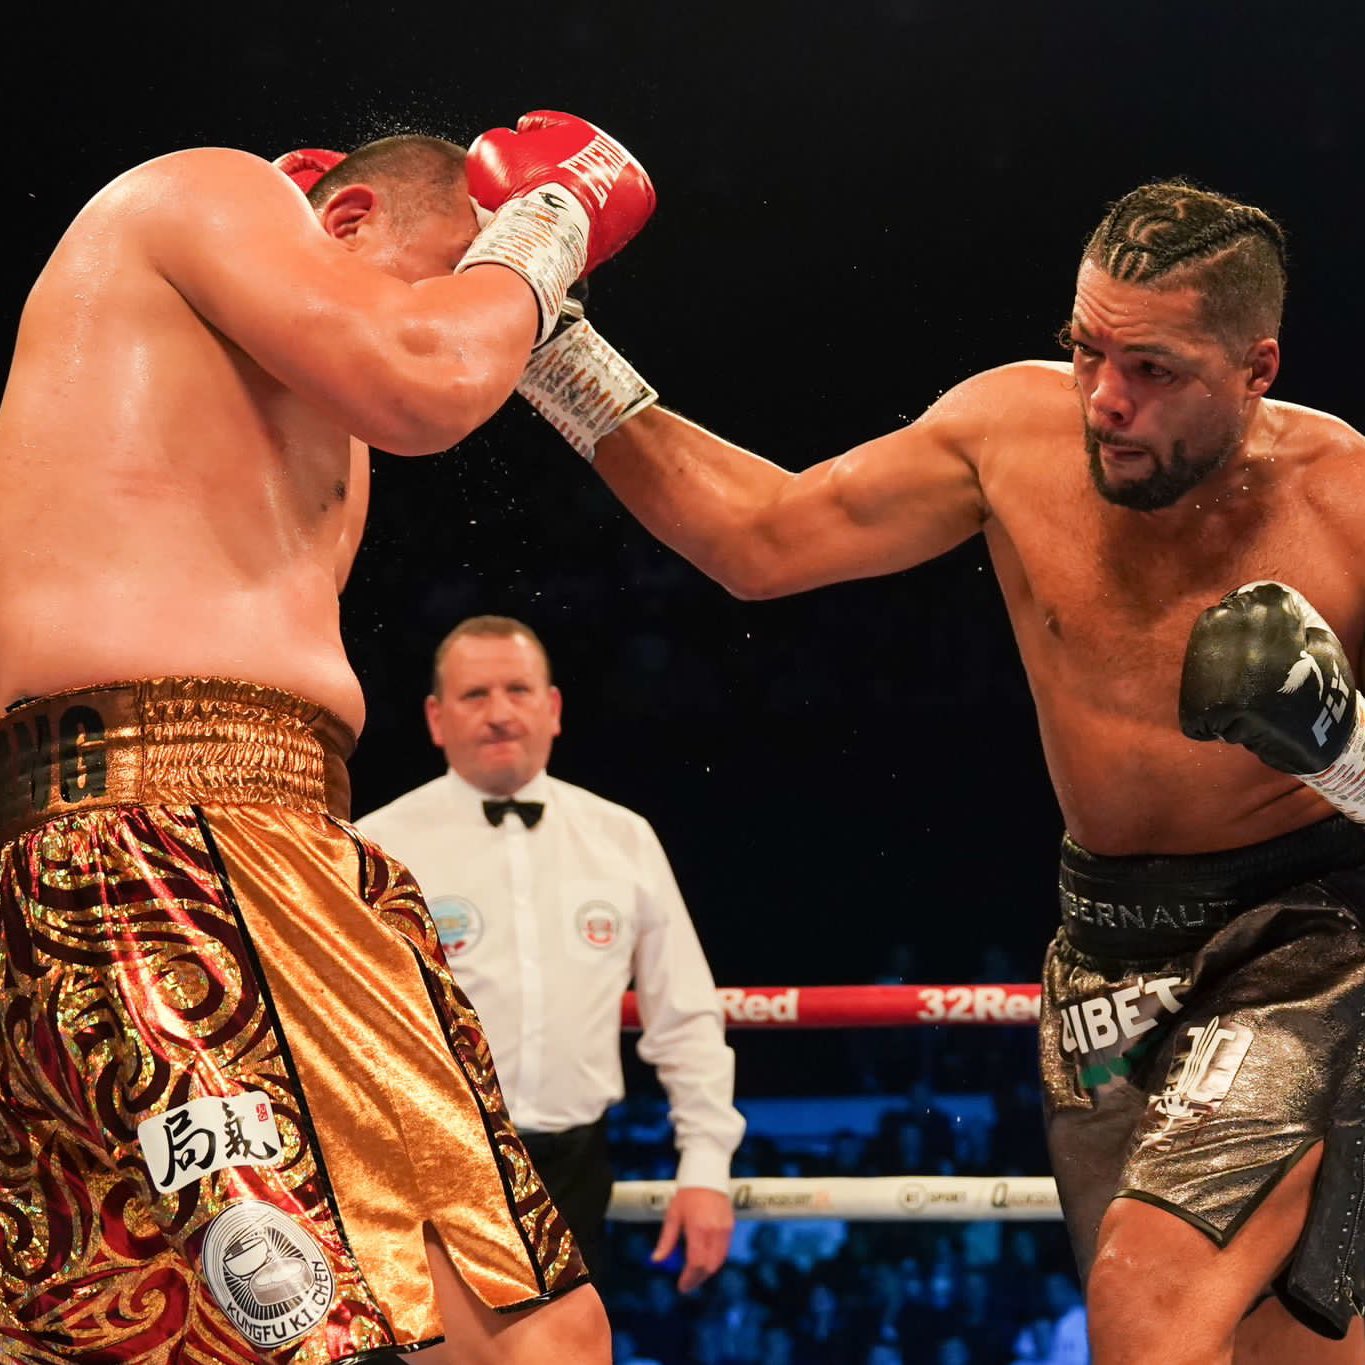 Joe Joyce: "I'm coming to take back what's mine' ahead of Zhang rematch encounter